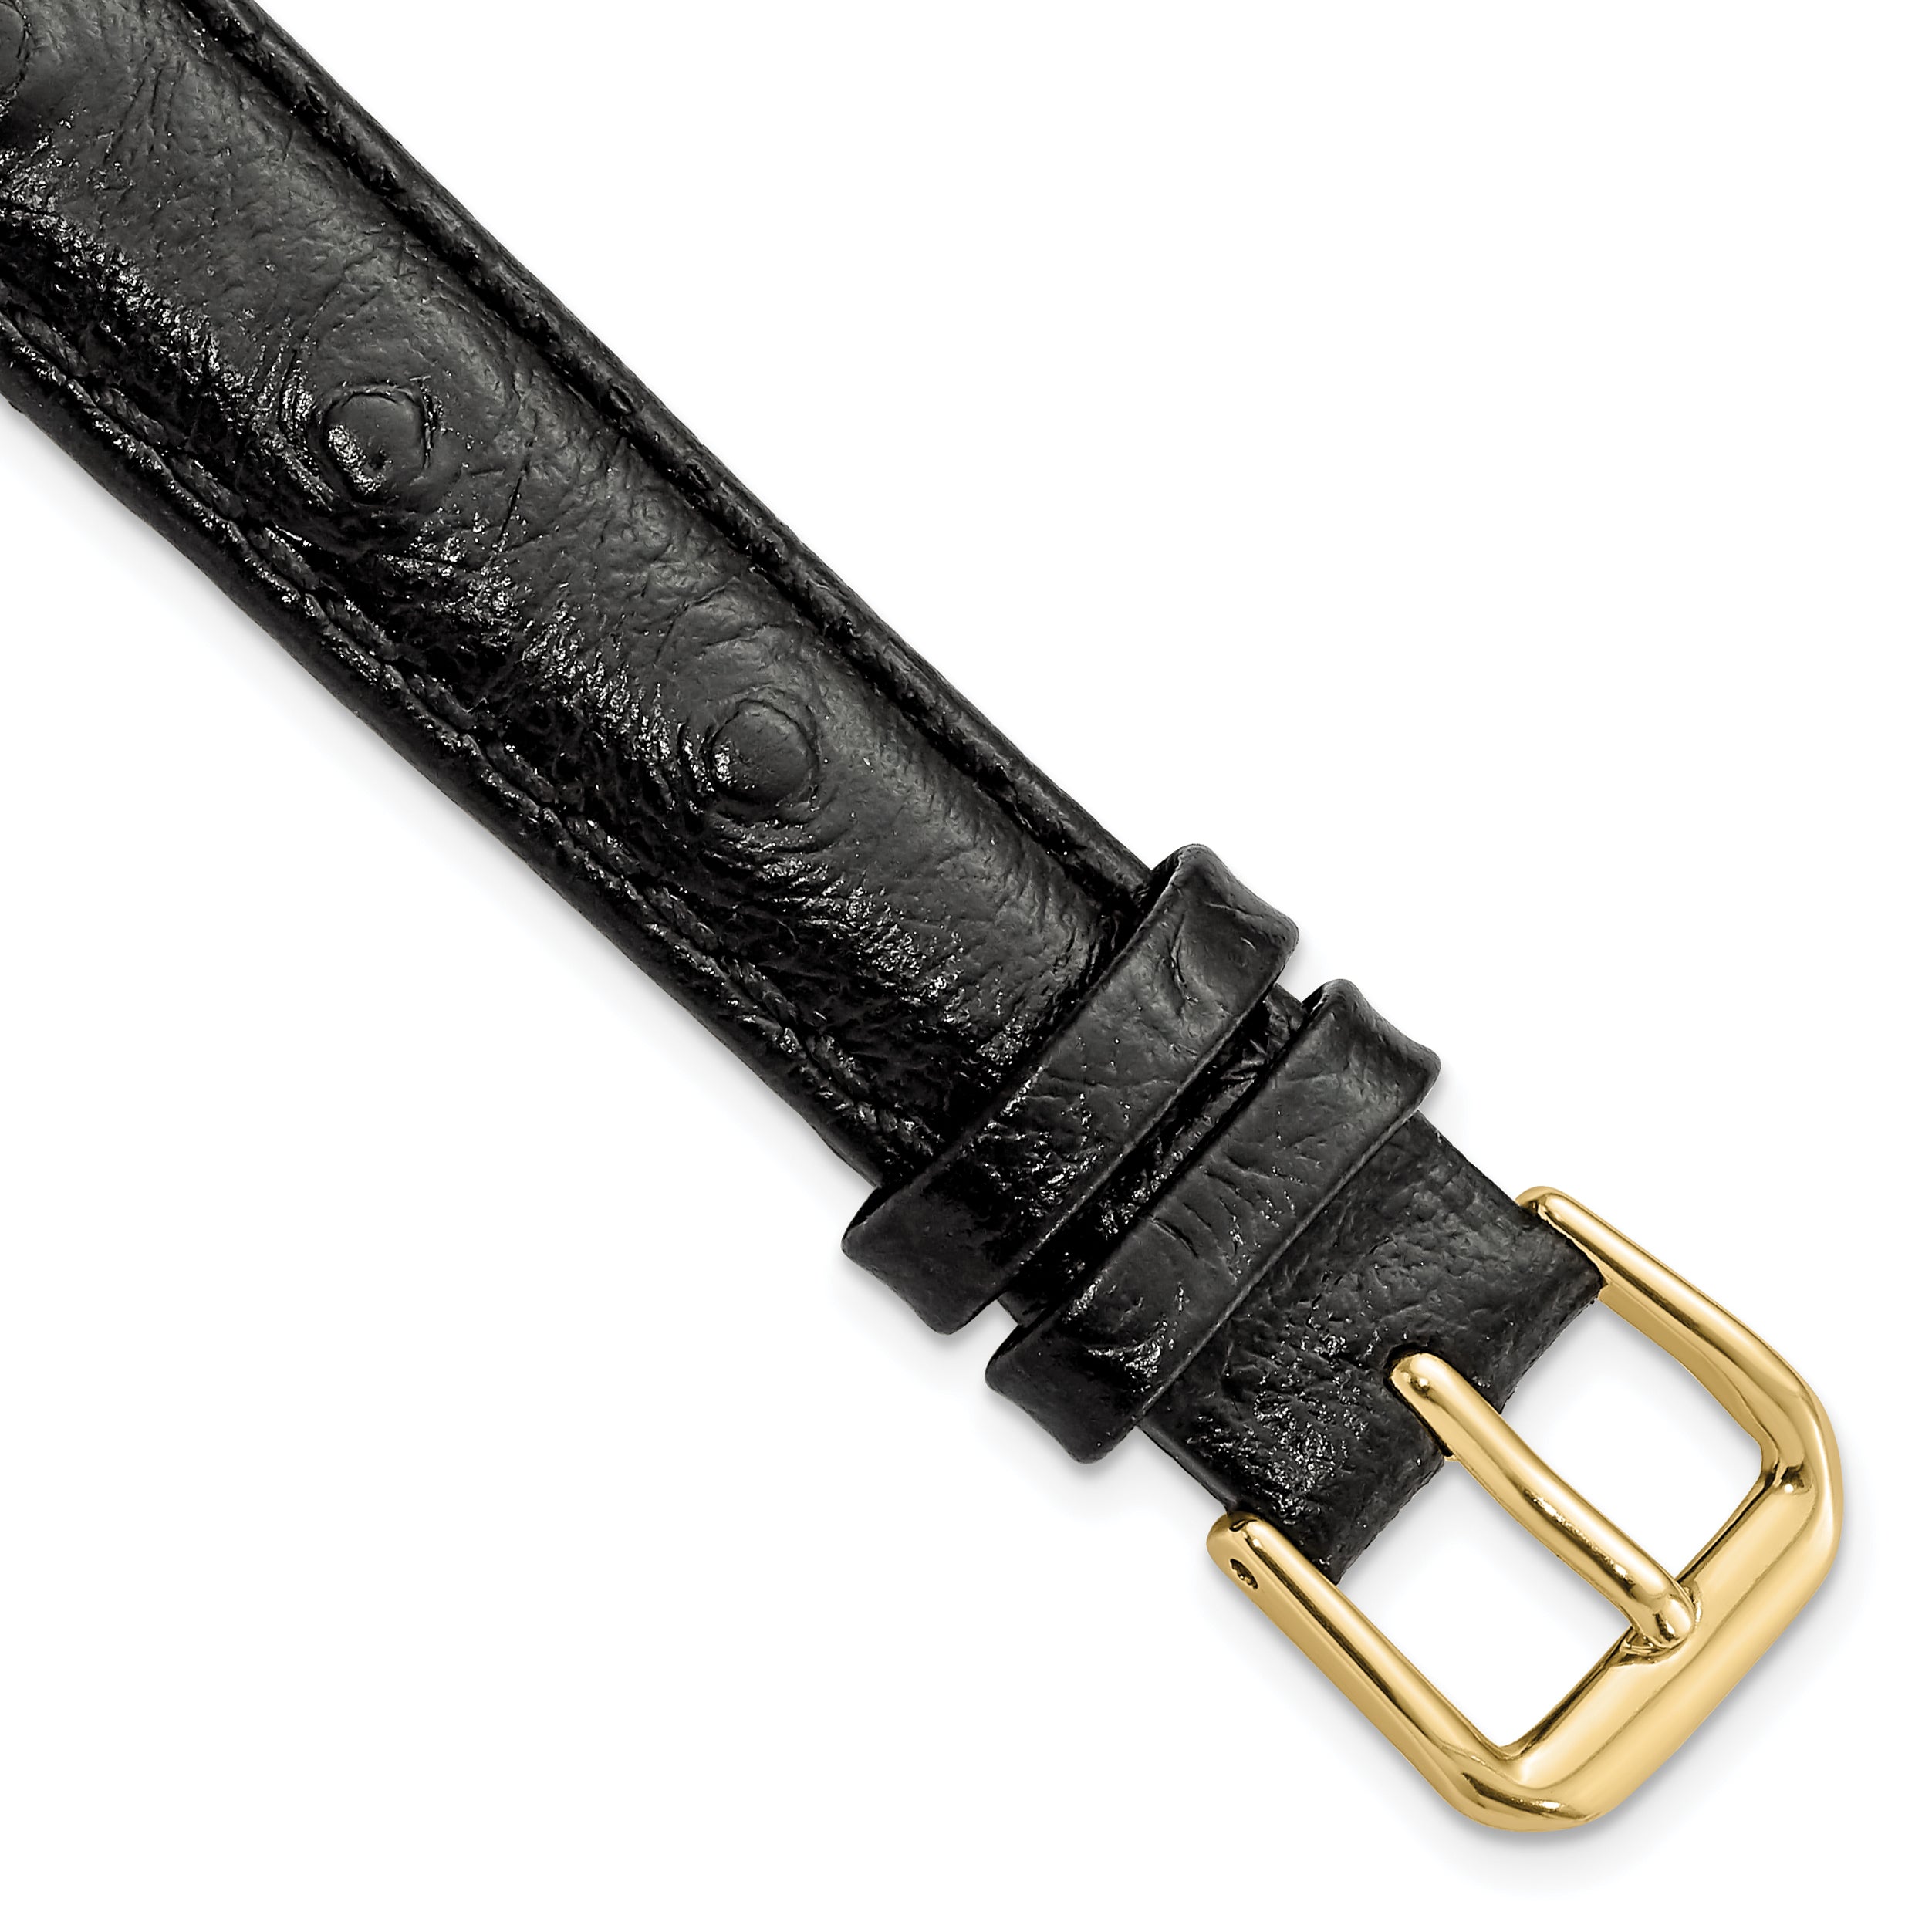 DeBeer 14mm Black Ostrich Grain Leather with Gold-tone Buckle 6.75 inch Watch Band